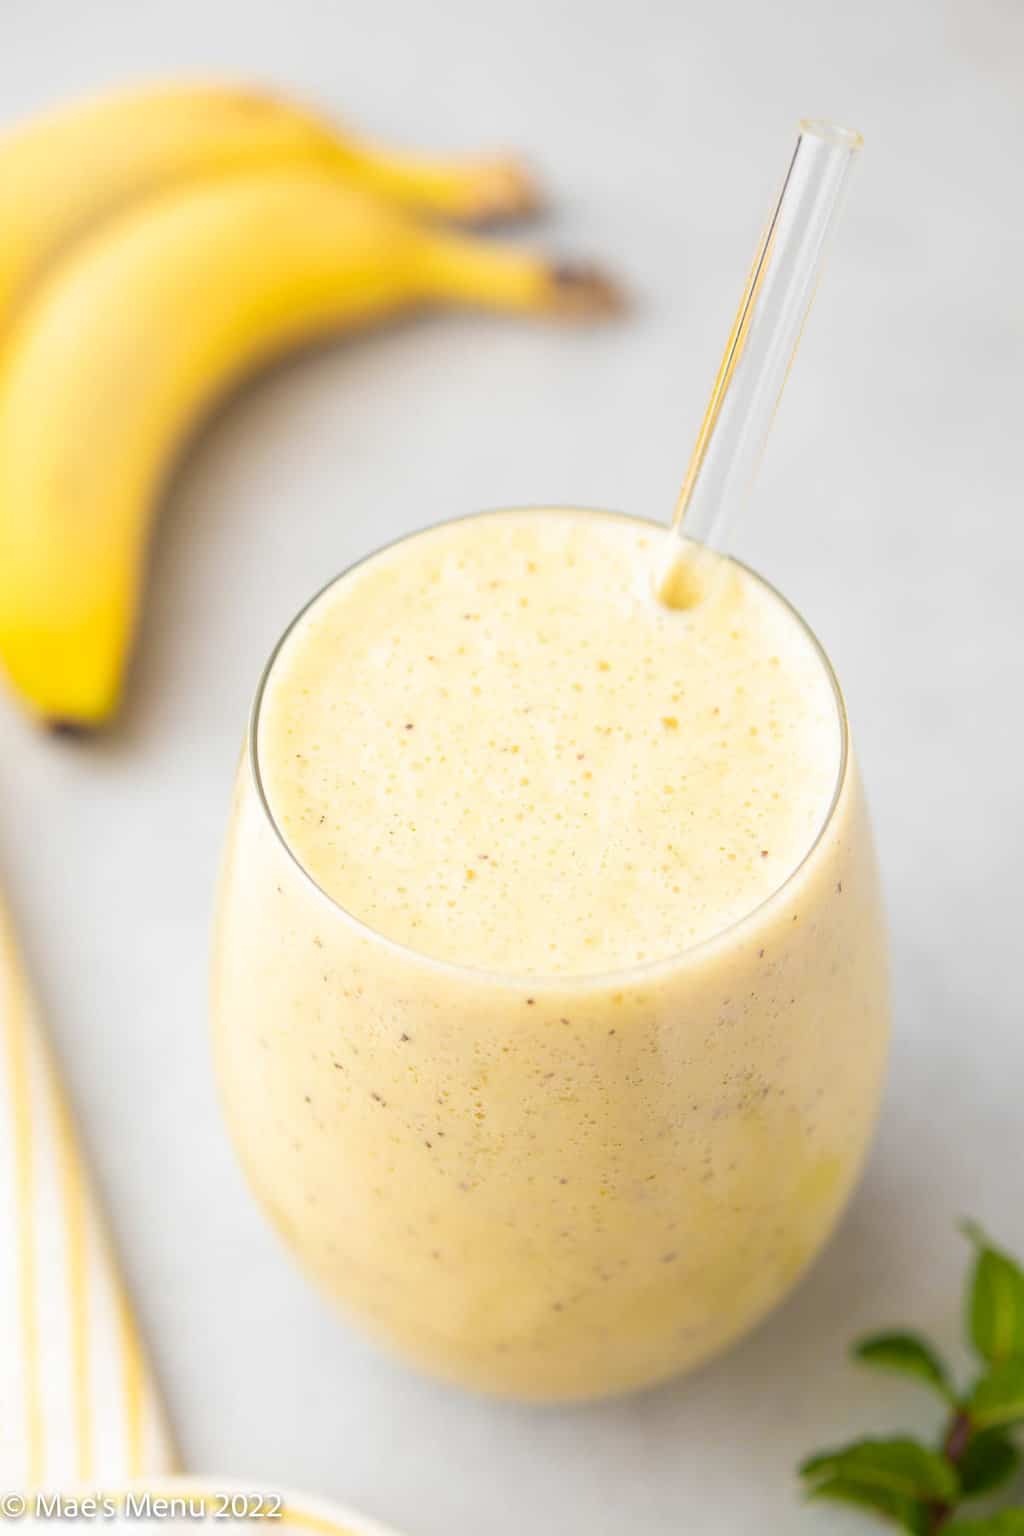 An up-close shot of a glass of pineapple banana smoothie with bananas in the background.